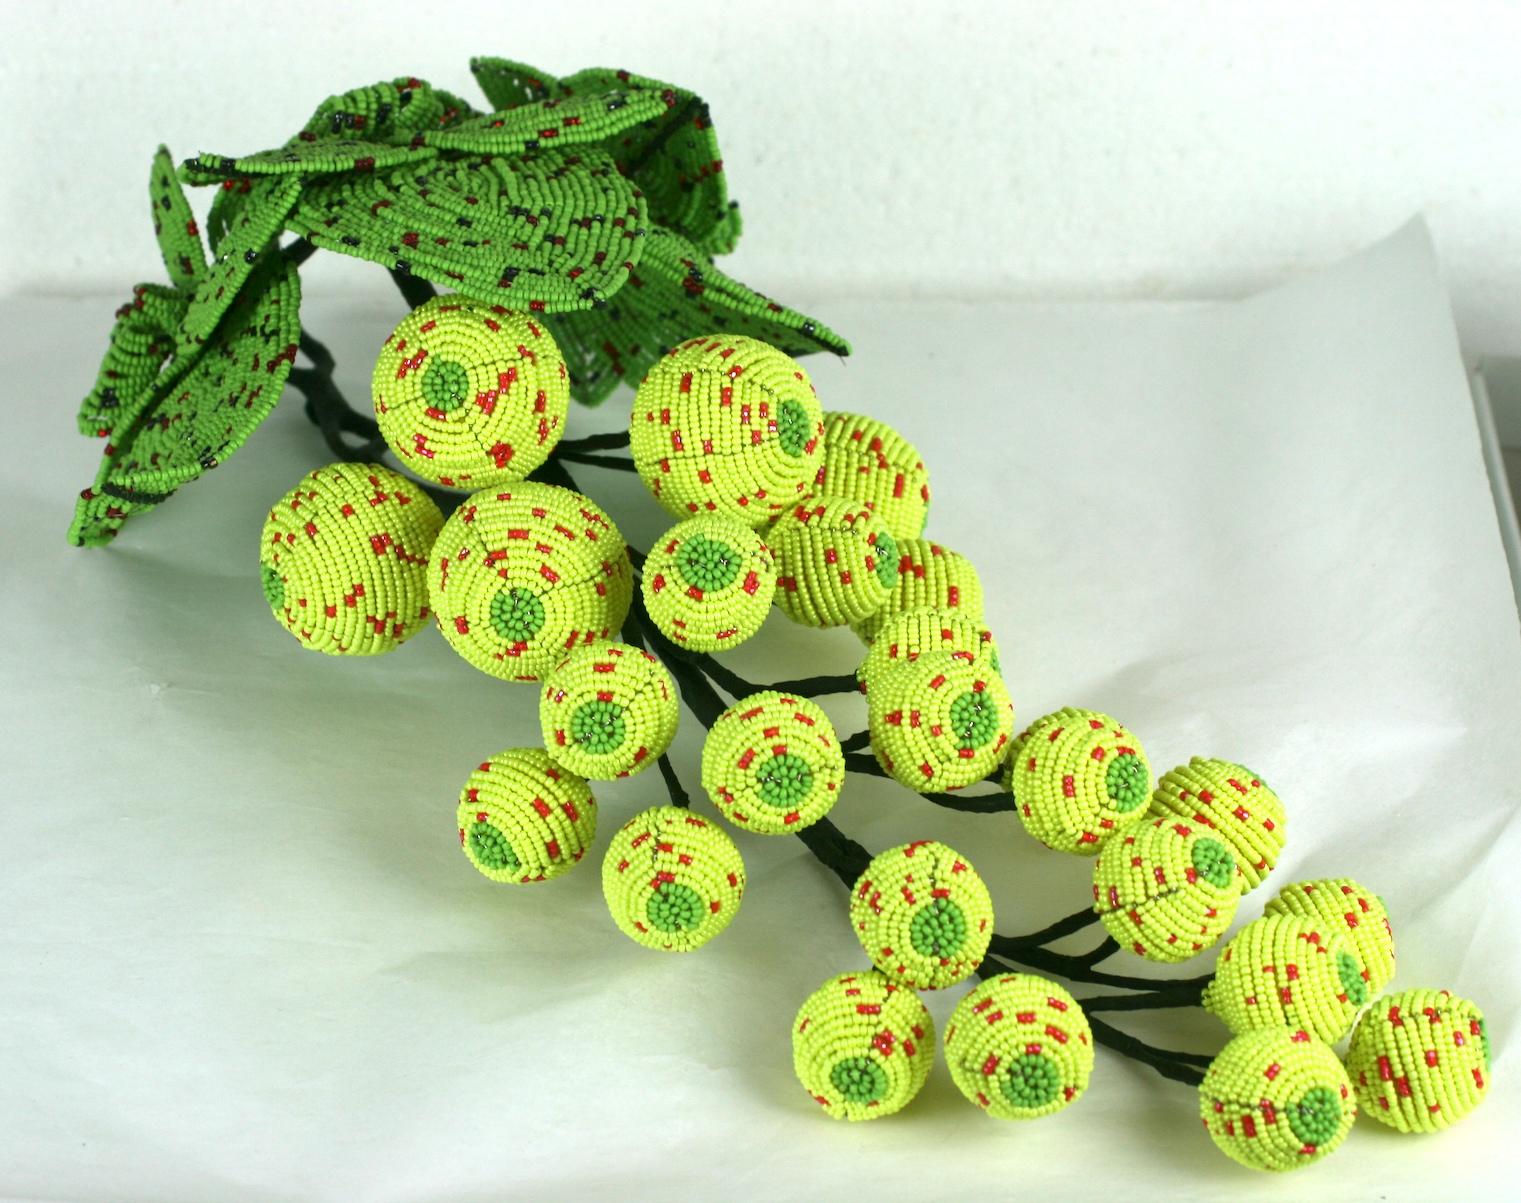 Hand beaded grape ornament made of vintage and contemporary glass beads in vibrant colorations. Neon yellow grapes beaded on foam and cork bases with rasberry speckles under a series of hand beaded grapes leaves in matte lime speckled with hematite